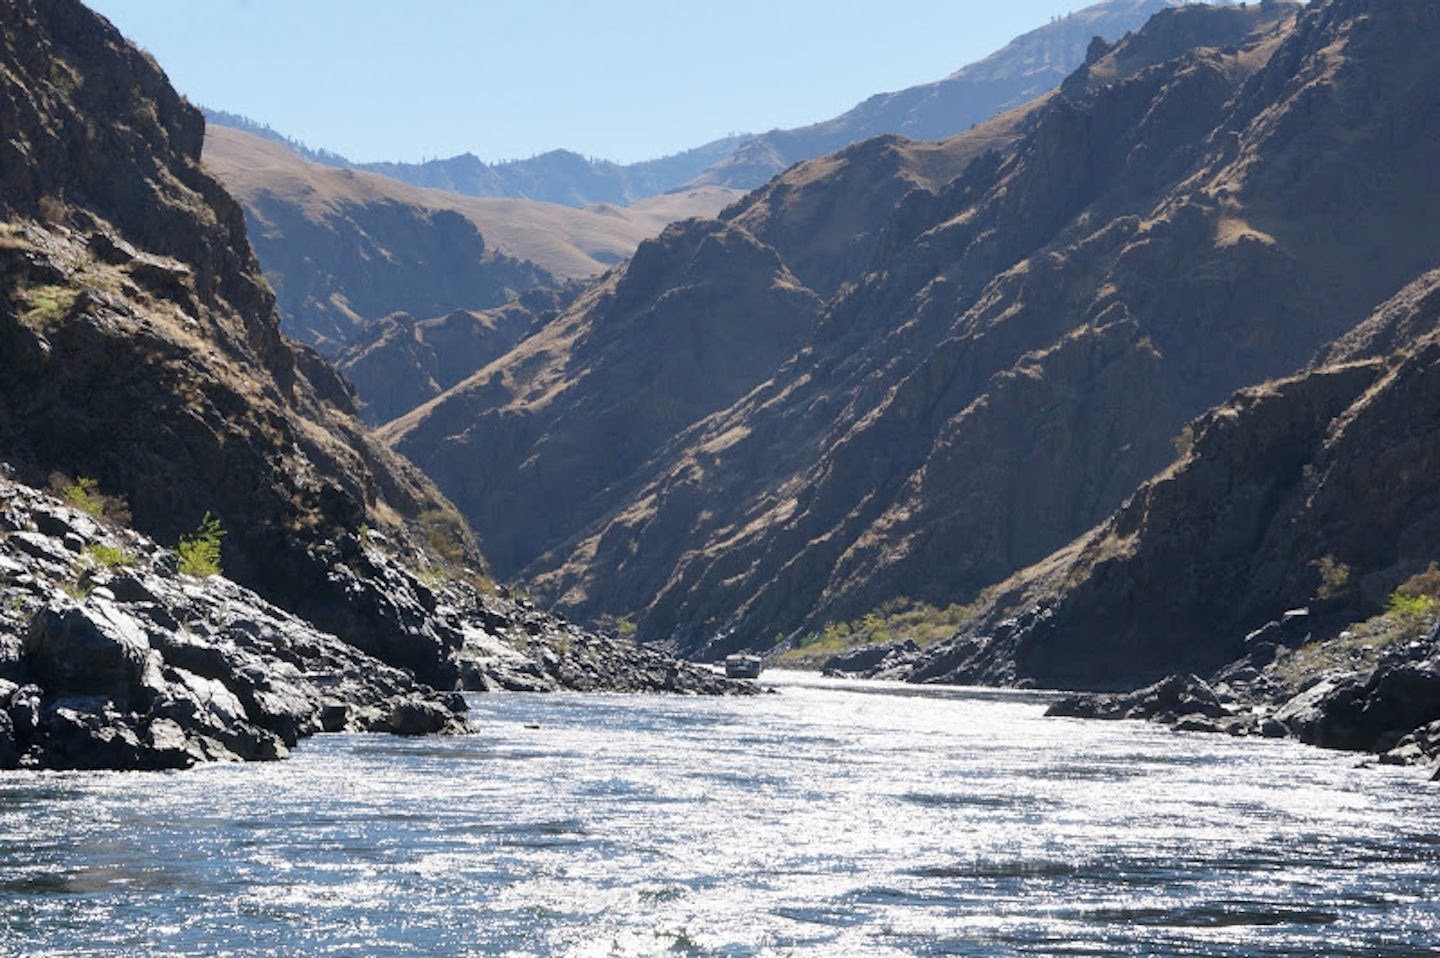 Trip into Hells Canyon